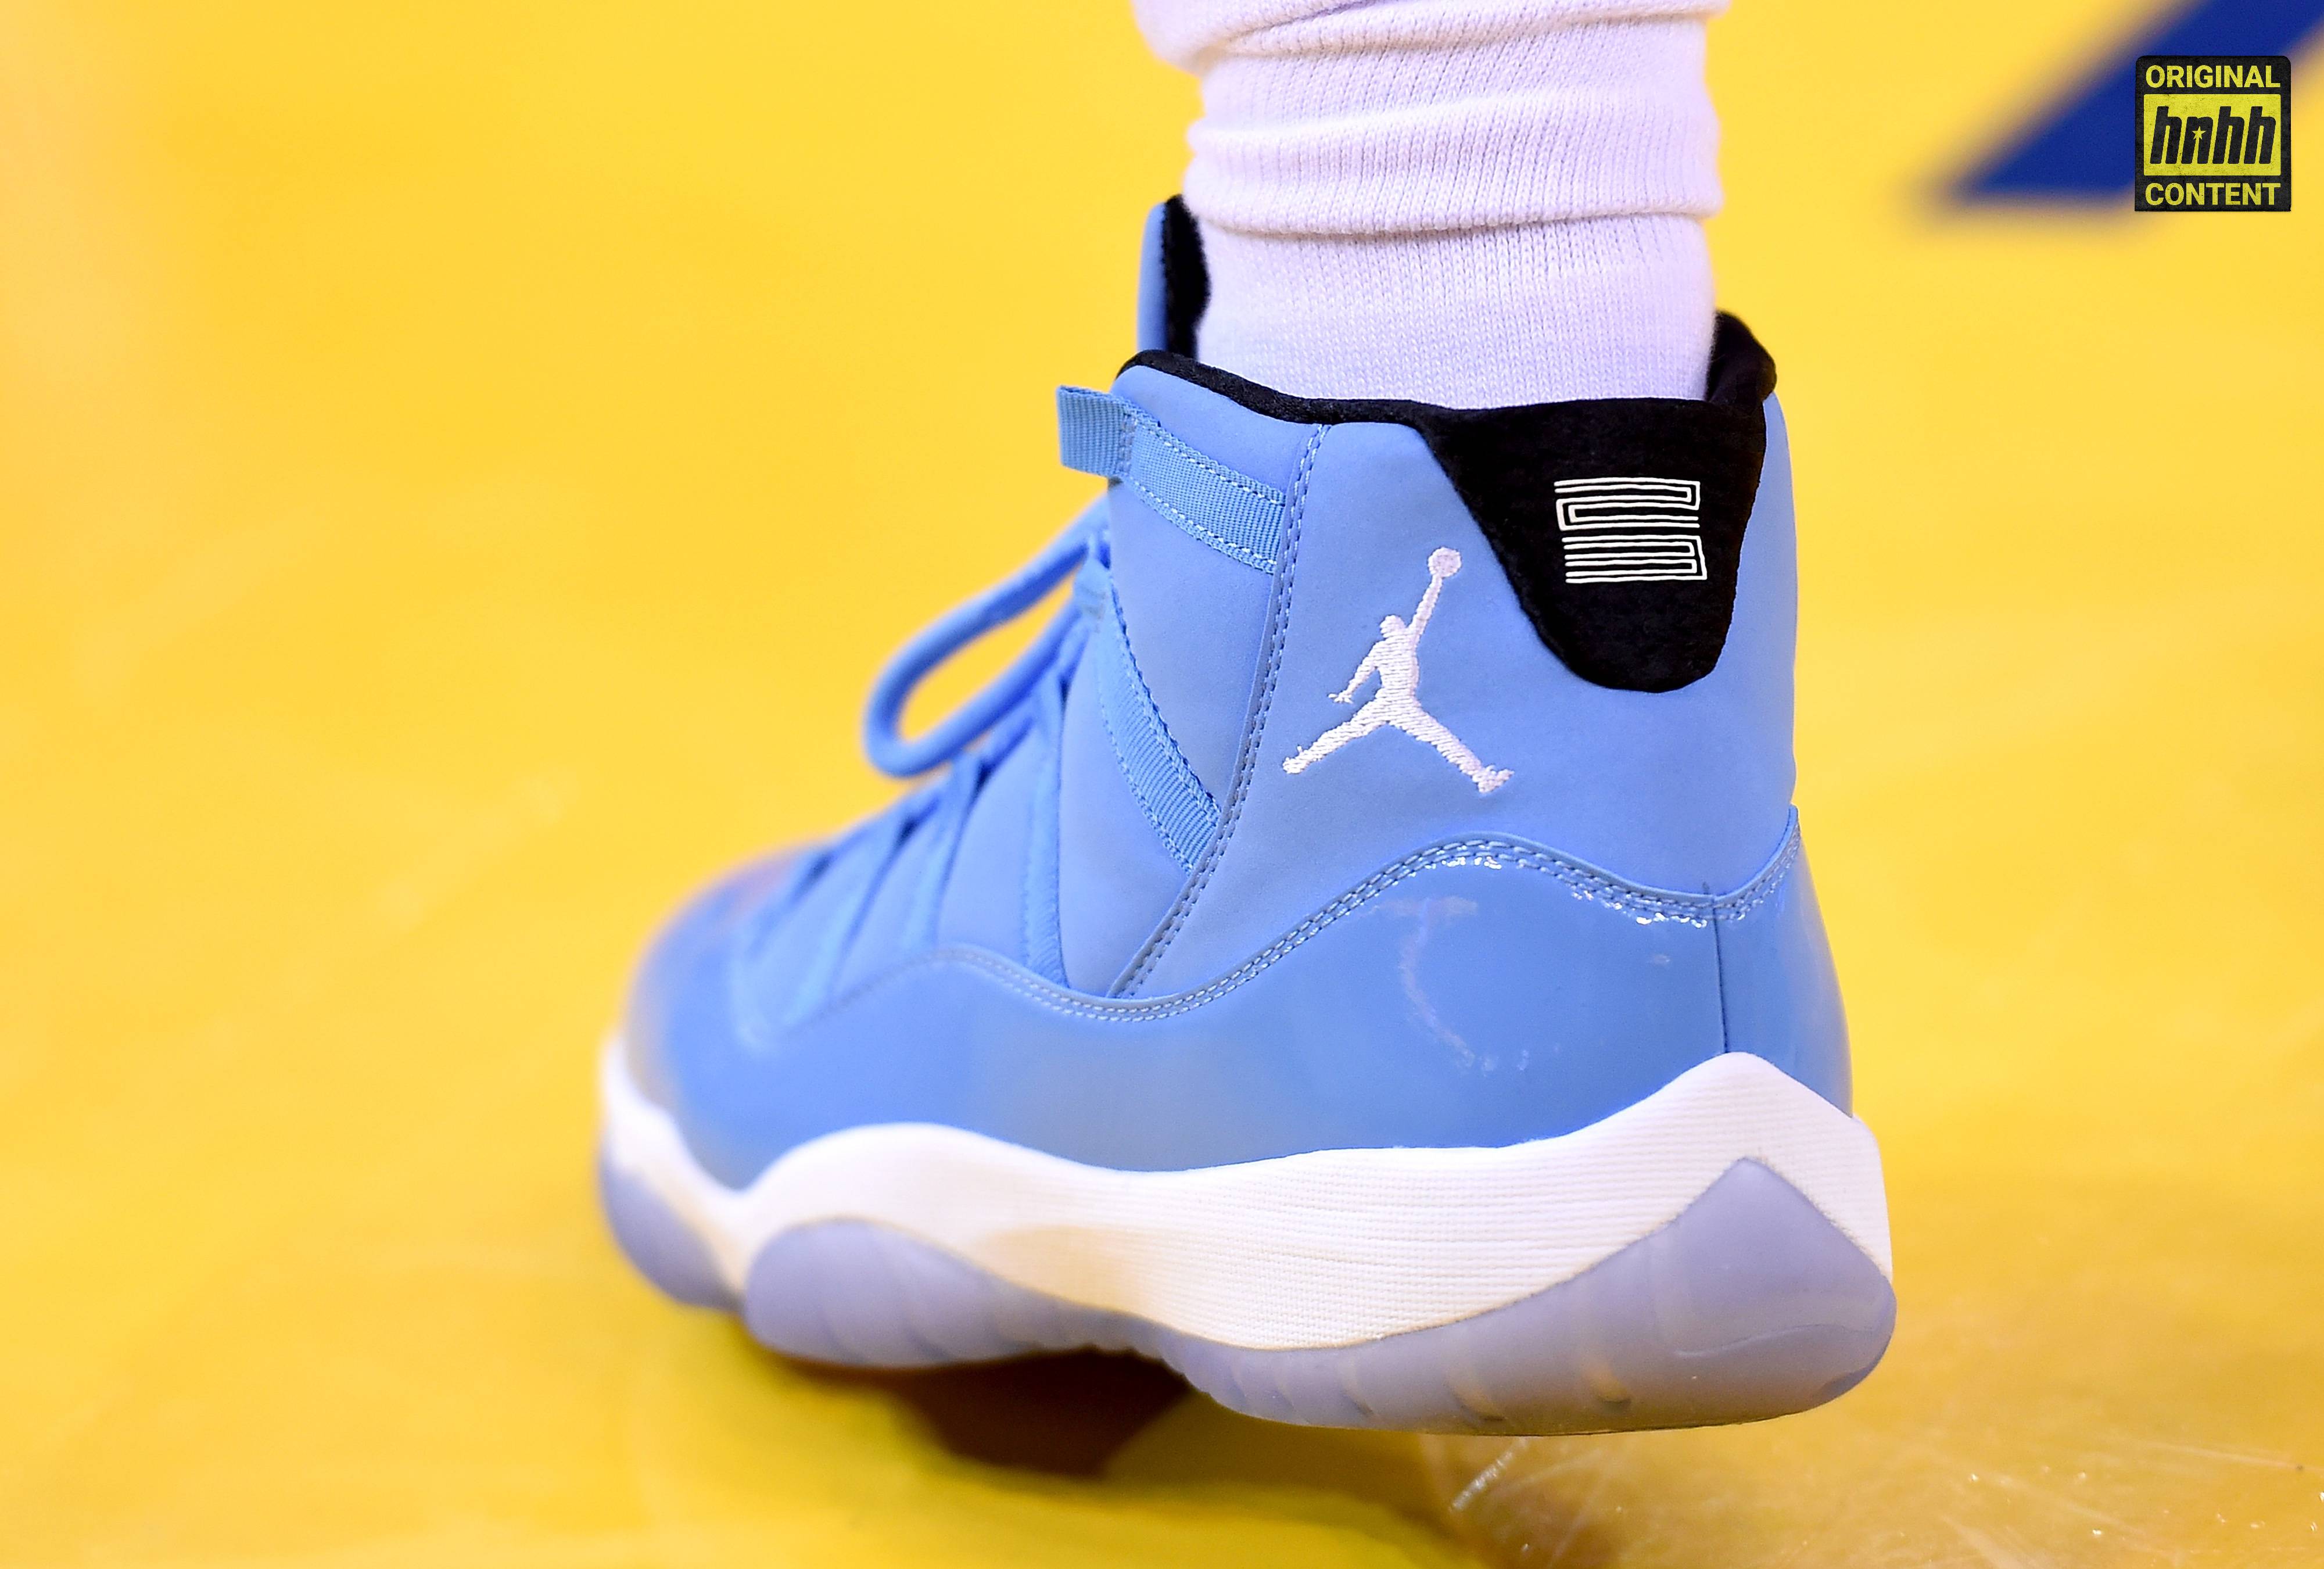 The Top 11 #11s Of All-Time 